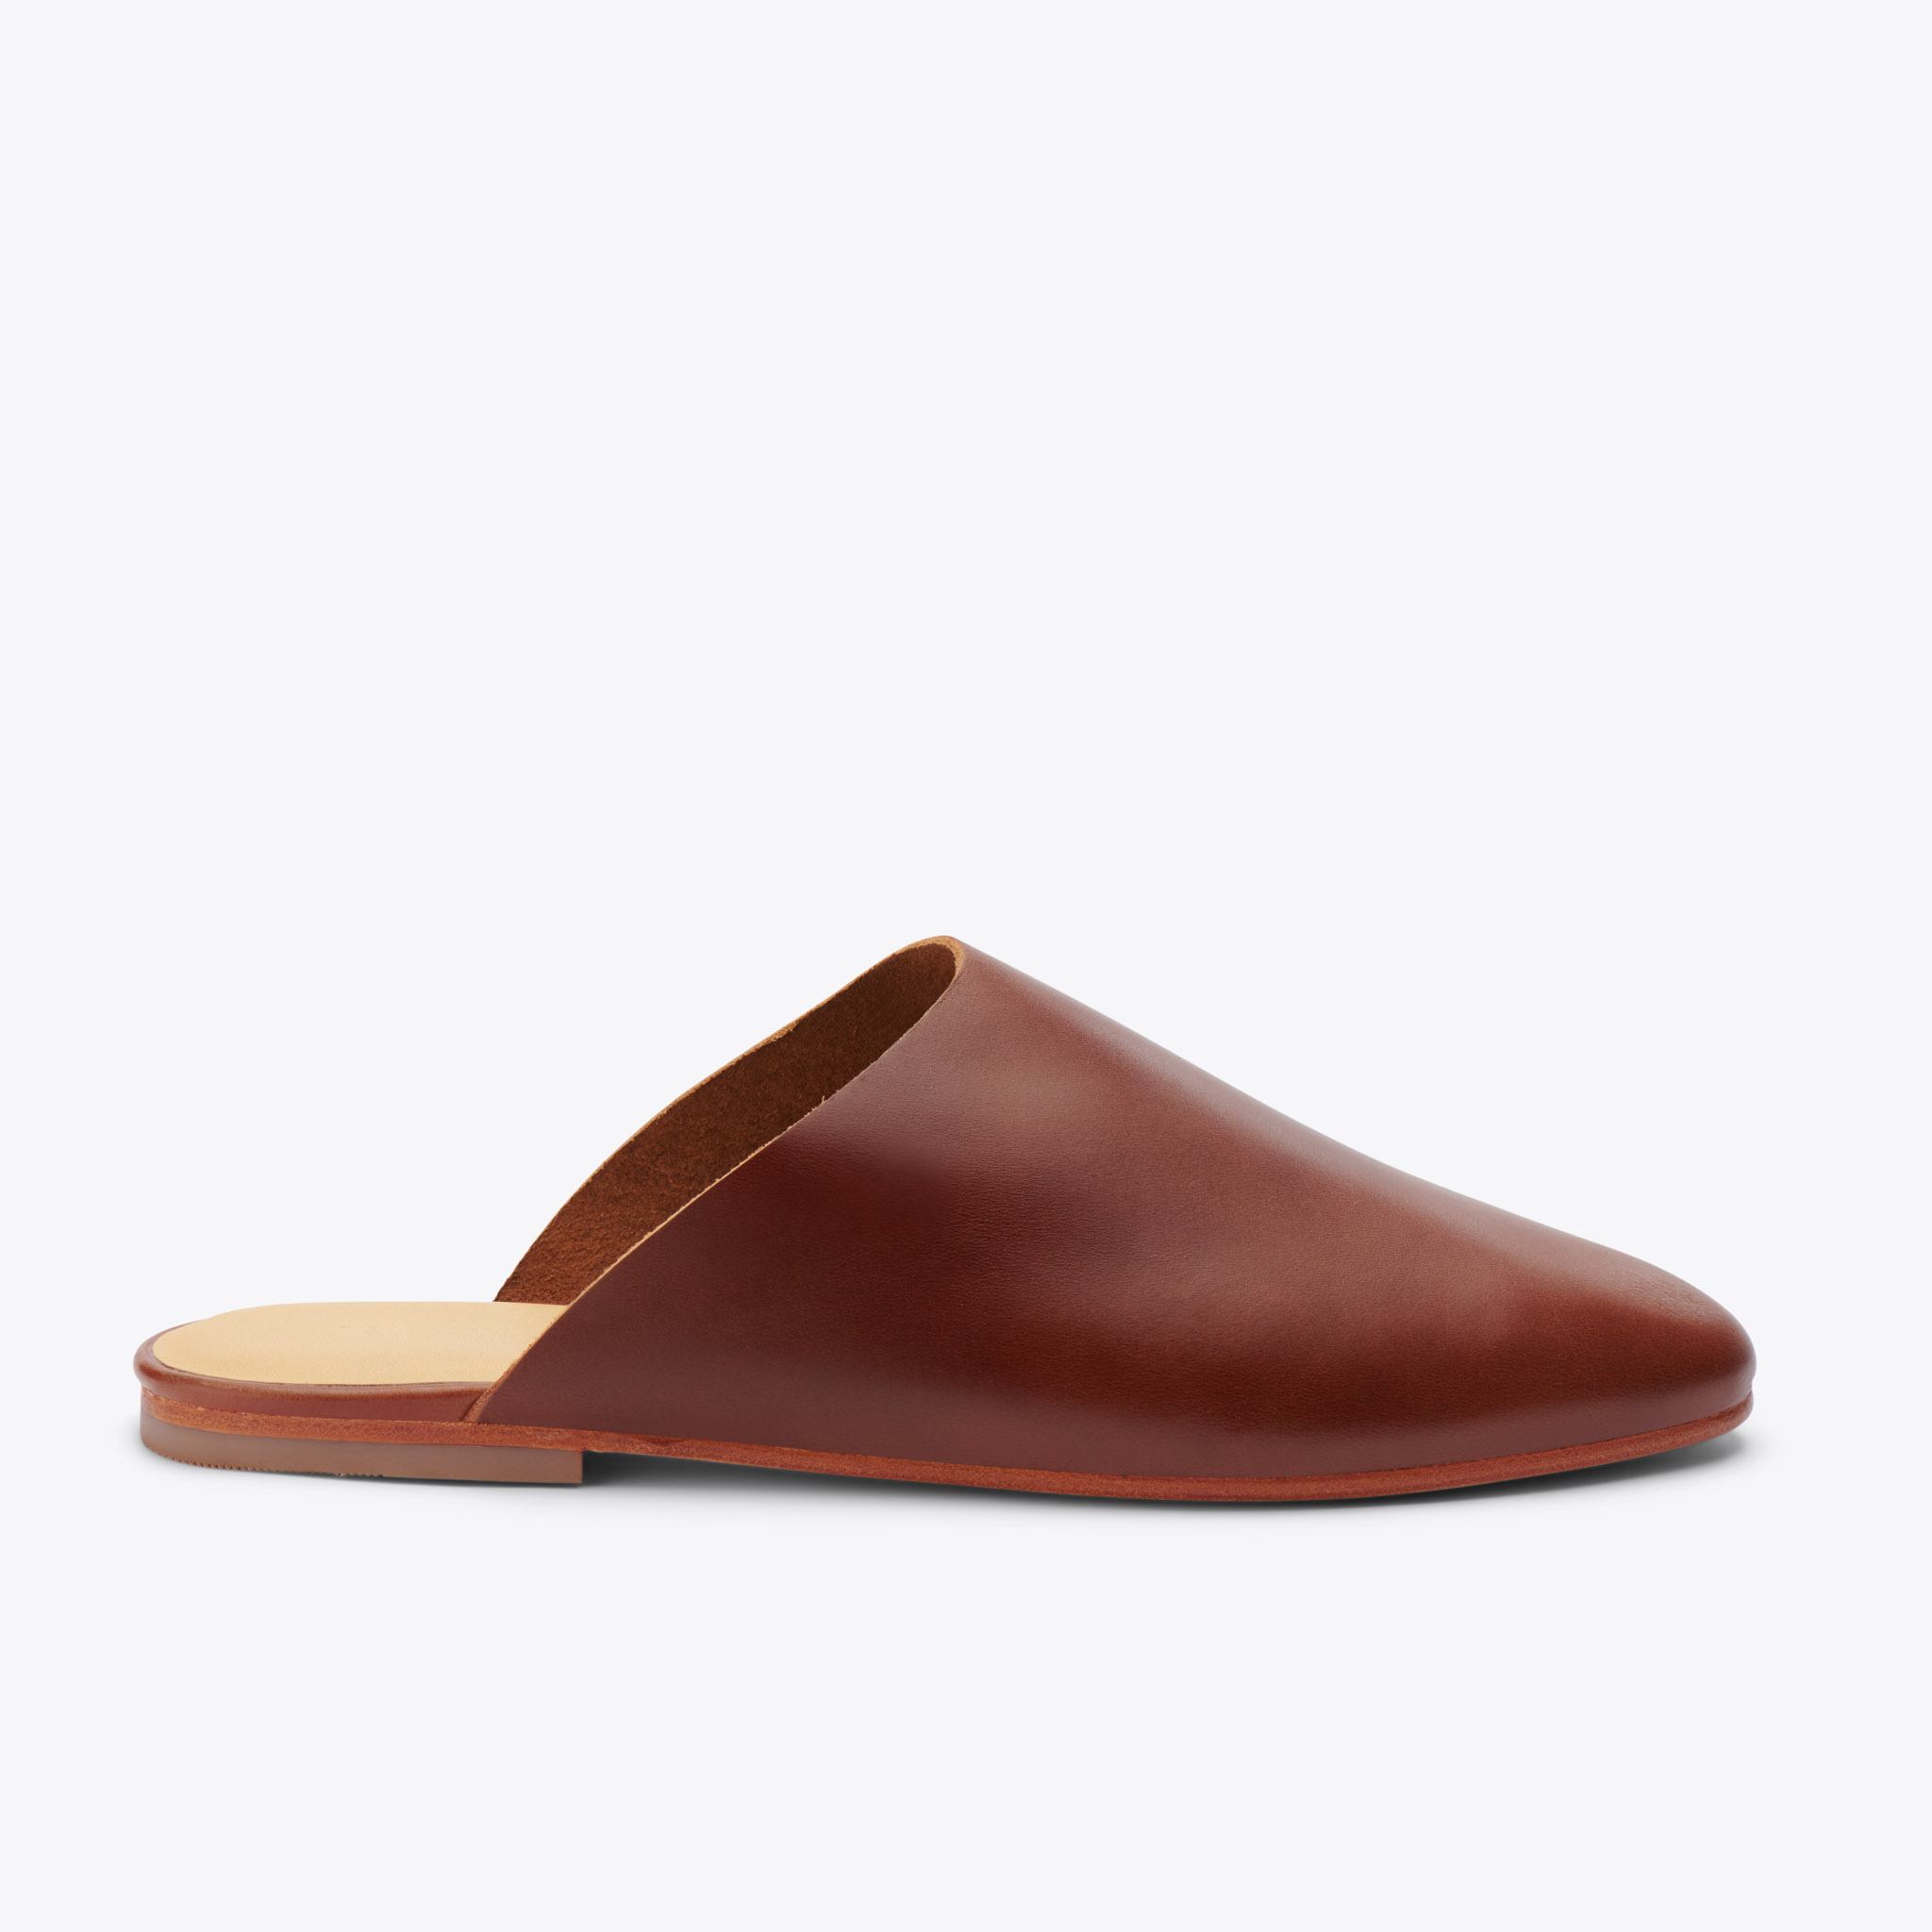 Product Image 2 of the Lima Slip On Brandy Women's Leather Slip On Nisolo 